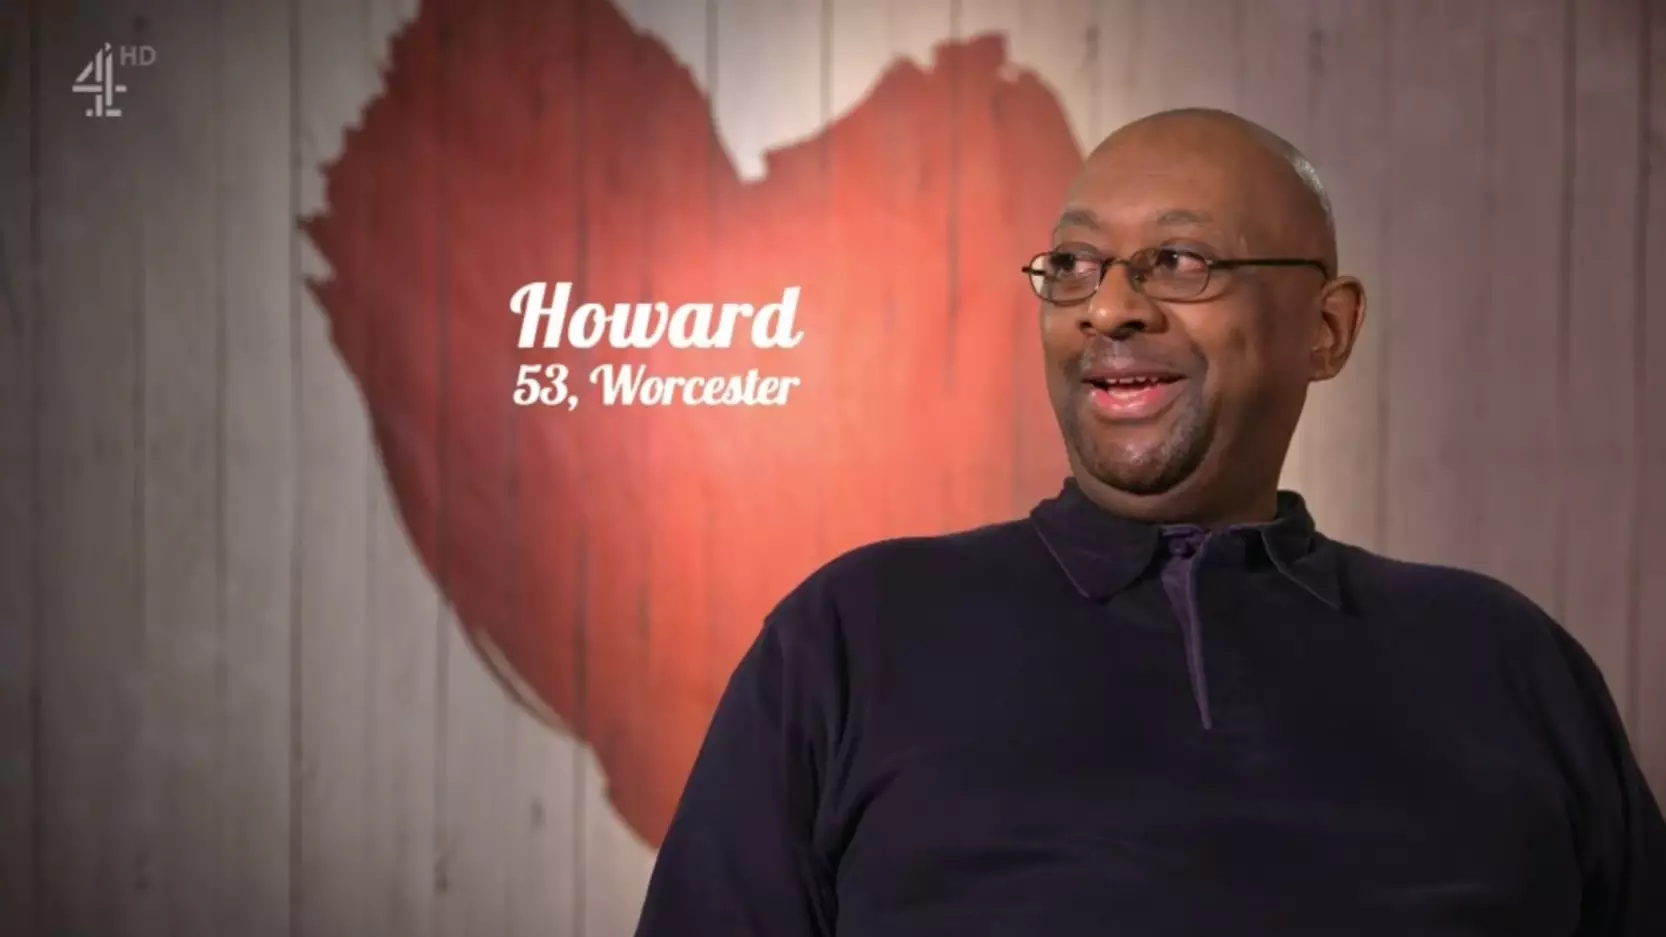 Howard From Halifax Adverts Looks For Someone Not 'Intimidated' By His Fame On First Dates